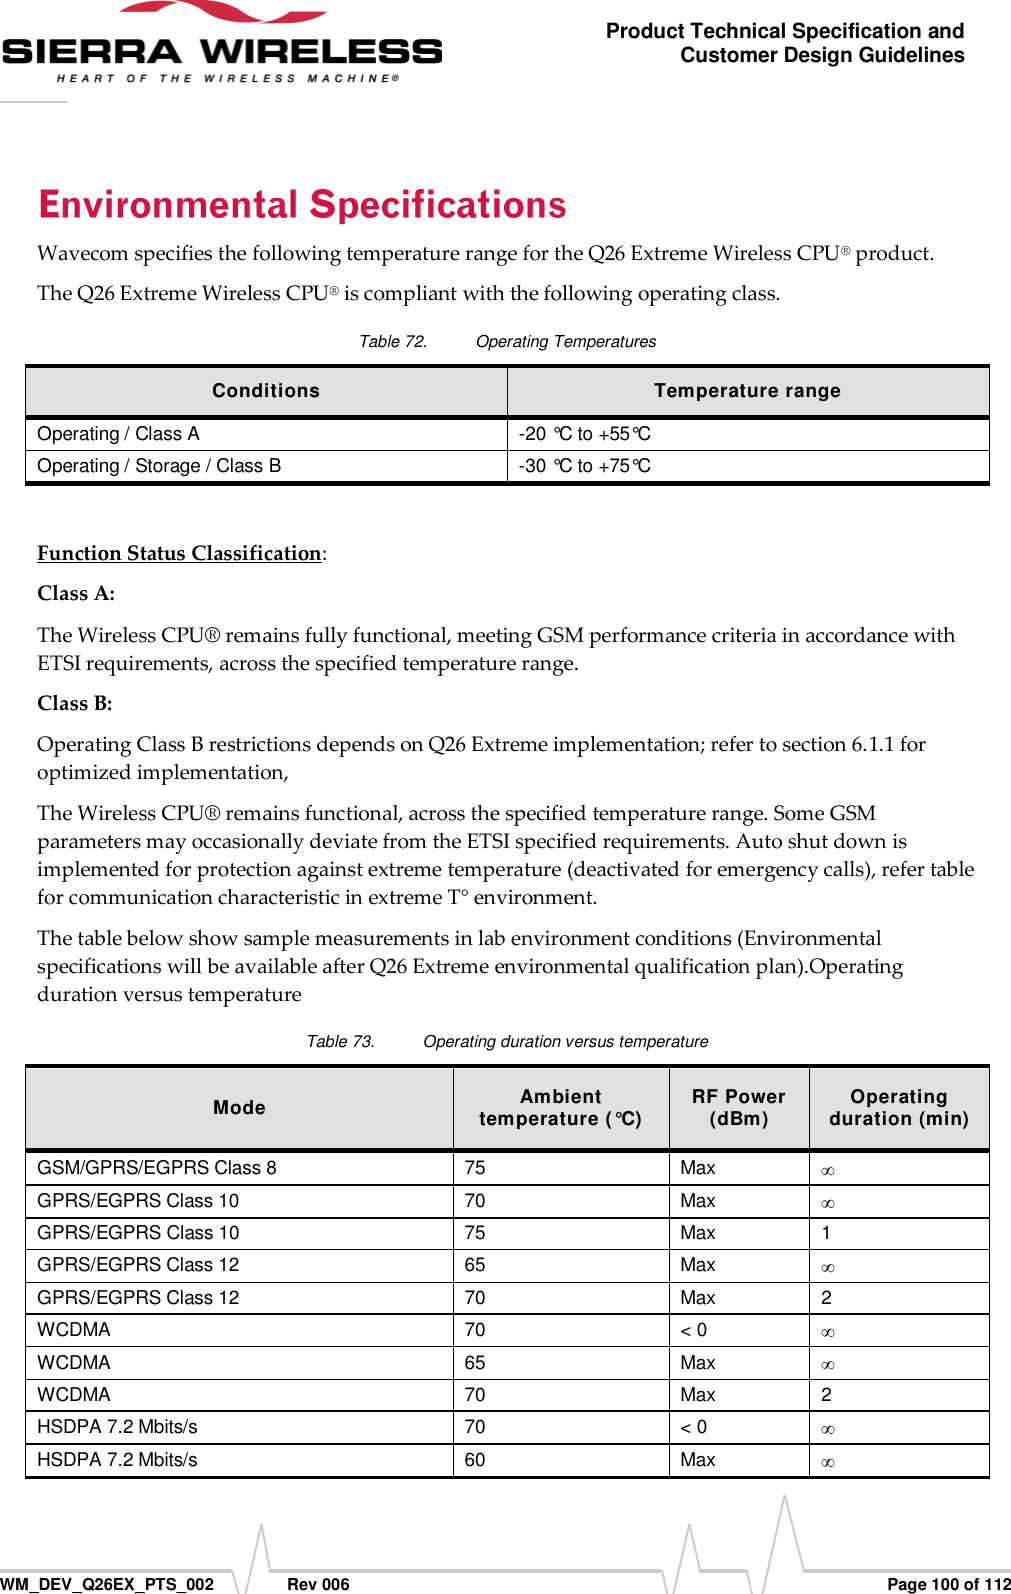      WM_DEV_Q26EX_PTS_002  Rev 006  Page 100 of 112 Product Technical Specification and Customer Design Guidelines Wavecom specifies the following temperature range for the Q26 Extreme Wireless CPU® product. The Q26 Extreme Wireless CPU® is compliant with the following operating class. Table 72.  Operating Temperatures Conditions Temperature range Operating / Class A -20 °C to +55°C Operating / Storage / Class B  -30 °C to +75°C   Function Status Classification: Class A:  The Wireless CPU® remains fully functional, meeting GSM performance criteria in accordance with ETSI requirements, across the specified temperature range.   Class B:  Operating Class B restrictions depends on Q26 Extreme implementation; refer to section 6.1.1 for optimized implementation,  The Wireless CPU® remains functional, across the specified temperature range. Some GSM parameters may occasionally deviate from the ETSI specified requirements. Auto shut down is implemented for protection against extreme temperature (deactivated for emergency calls), refer table for communication characteristic in extreme T° environment. The table below show sample measurements in lab environment conditions (Environmental specifications will be available after Q26 Extreme environmental qualification plan).Operating duration versus temperature Table 73.  Operating duration versus temperature Mode Ambient temperature (°C) RF Power (dBm) Operating duration (min) GSM/GPRS/EGPRS Class 8 75 Max  GPRS/EGPRS Class 10 70 Max  GPRS/EGPRS Class 10 75 Max 1 GPRS/EGPRS Class 12 65 Max  GPRS/EGPRS Class 12 70 Max 2 WCDMA 70 &lt; 0  WCDMA 65 Max  WCDMA 70 Max 2 HSDPA 7.2 Mbits/s 70 &lt; 0  HSDPA 7.2 Mbits/s 60 Max  